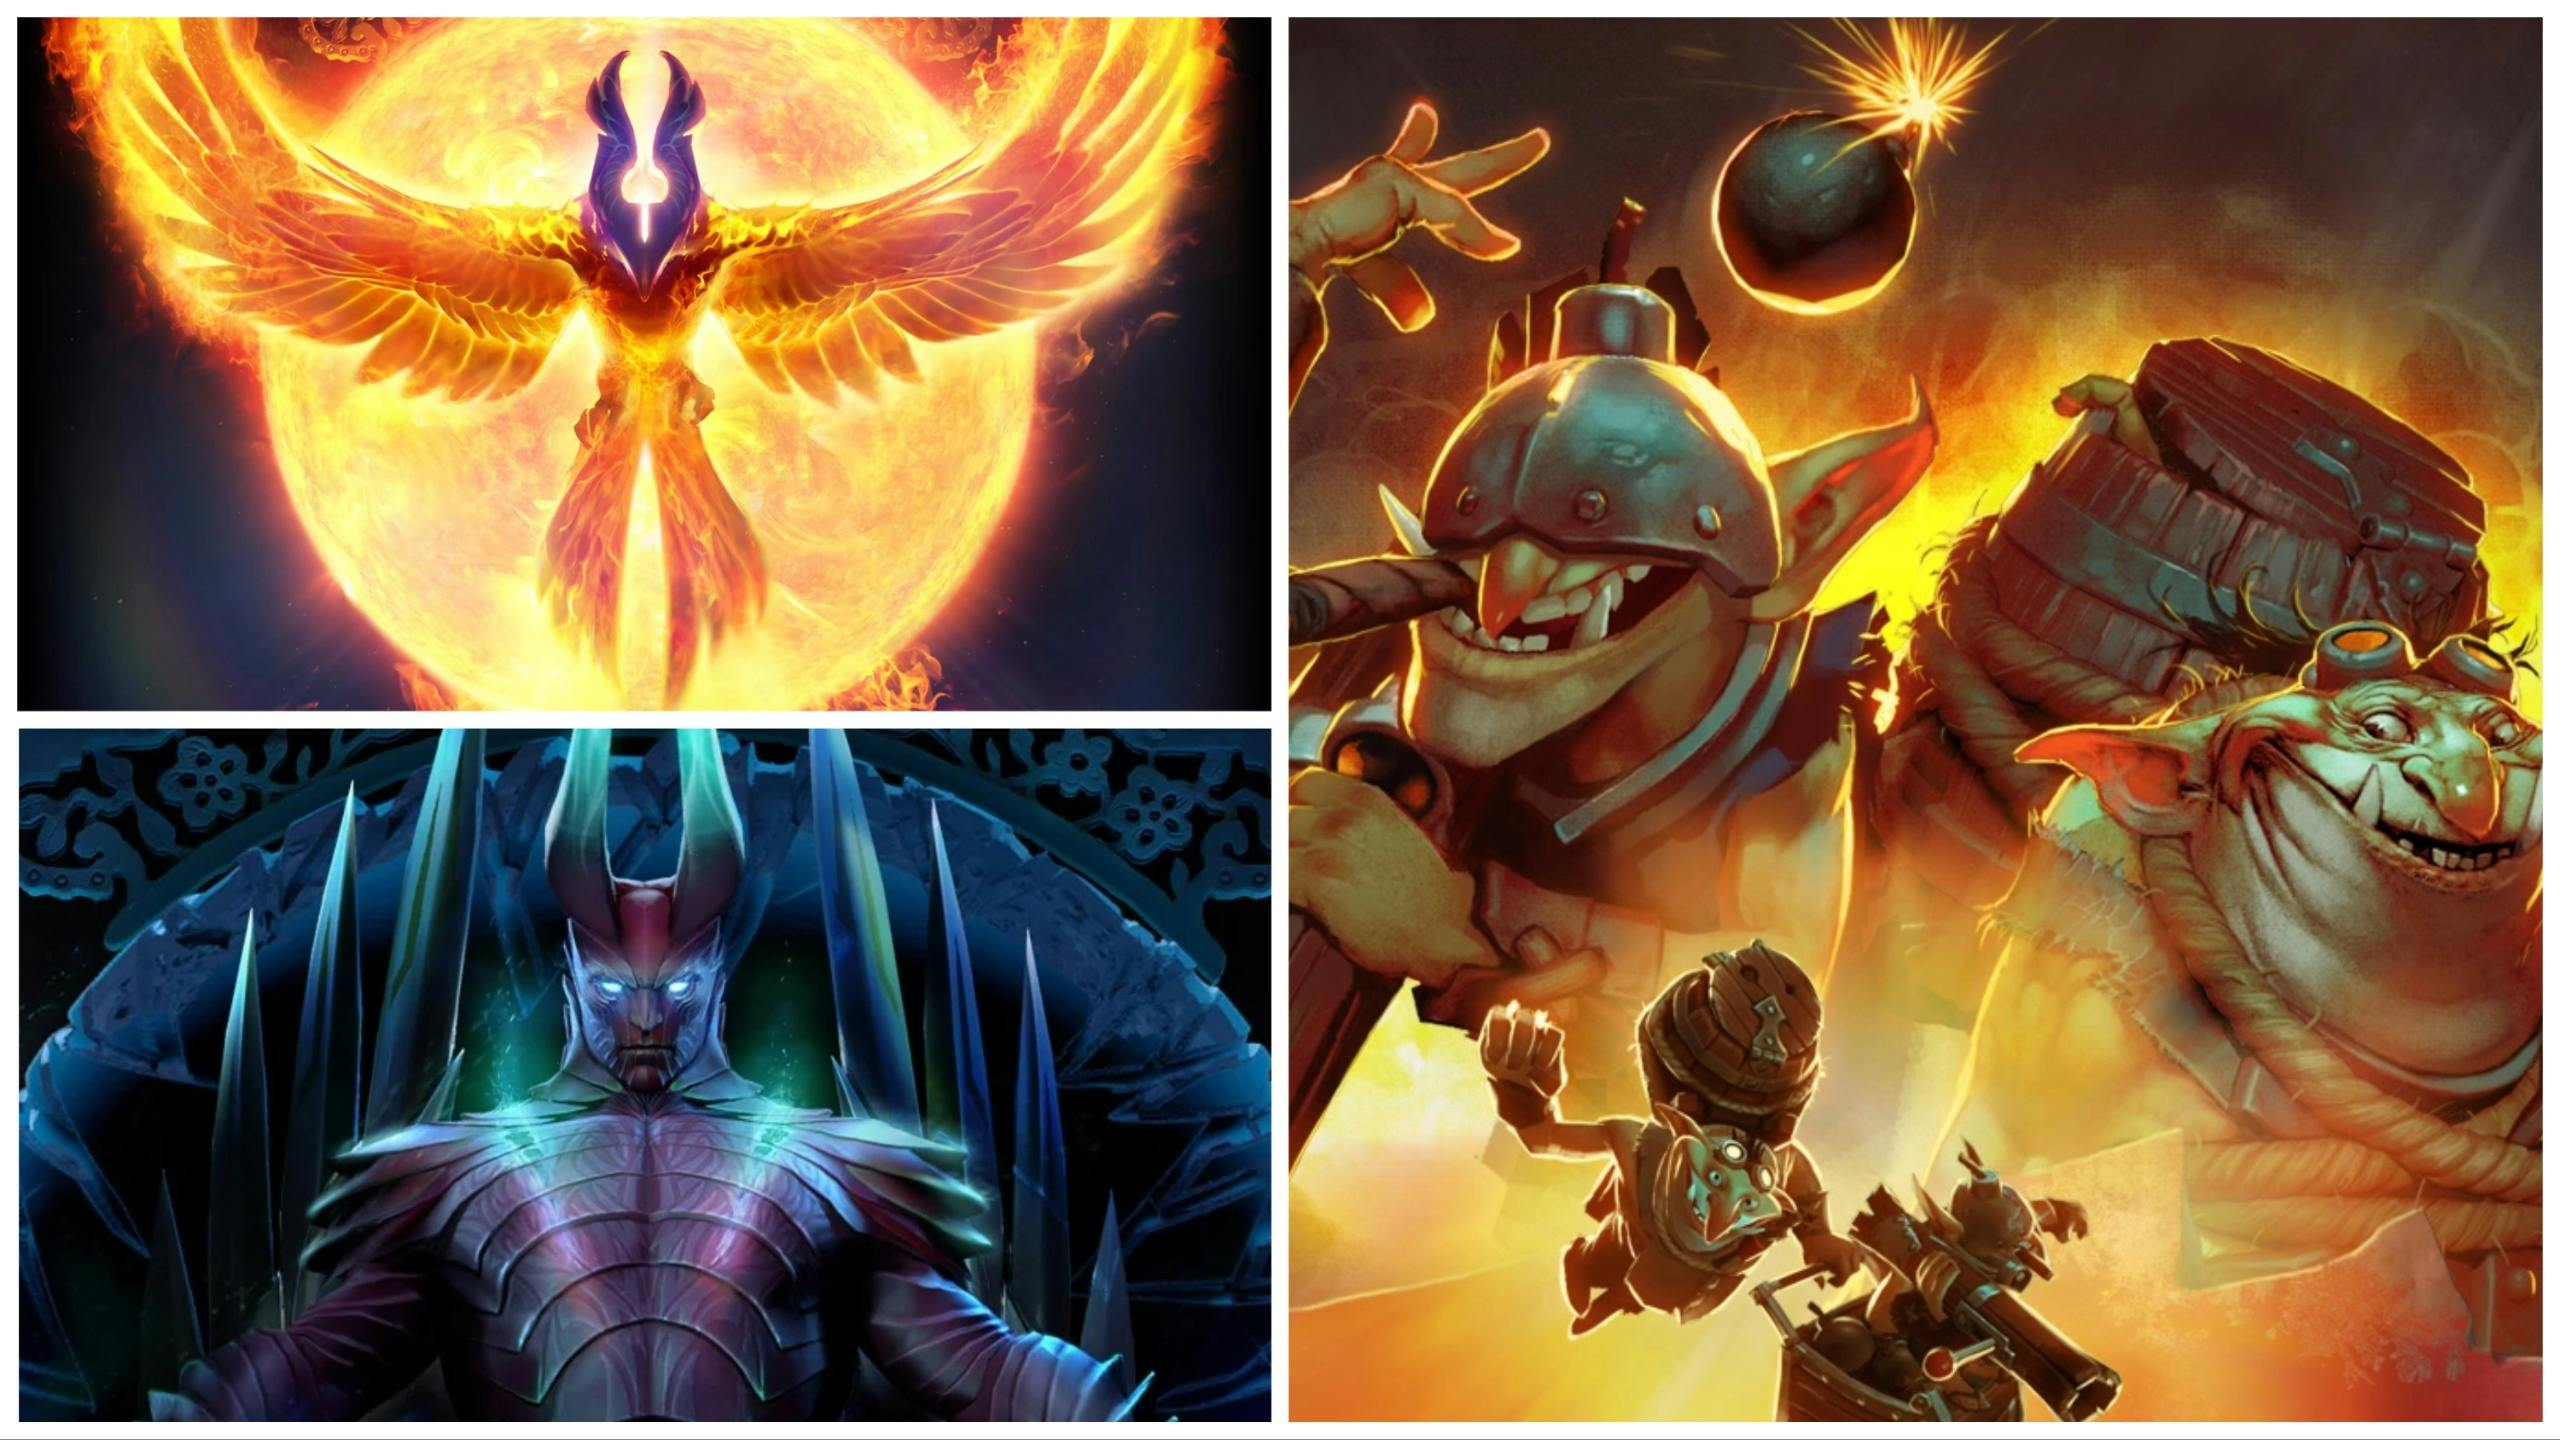 Only three Dota 2 heroes were released in 2014: Pheonix, Terrorblade, and Techies. 